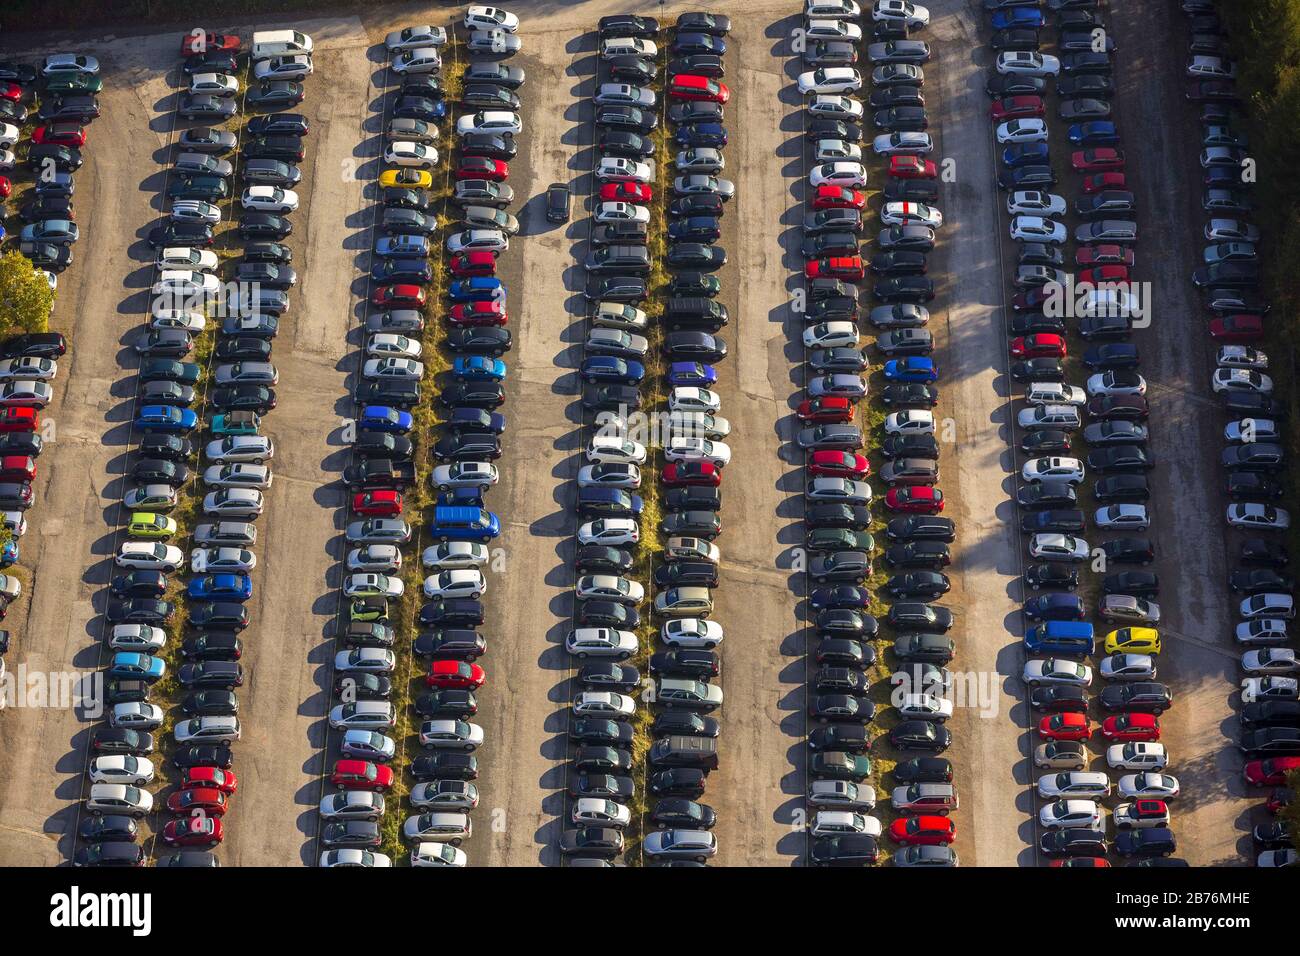 , staff parking lot of DORMA Germany, 28.10.2014, aerial view, Germany, North Rhine-Westphalia, Ruhr Area, Ennepetal Stock Photo